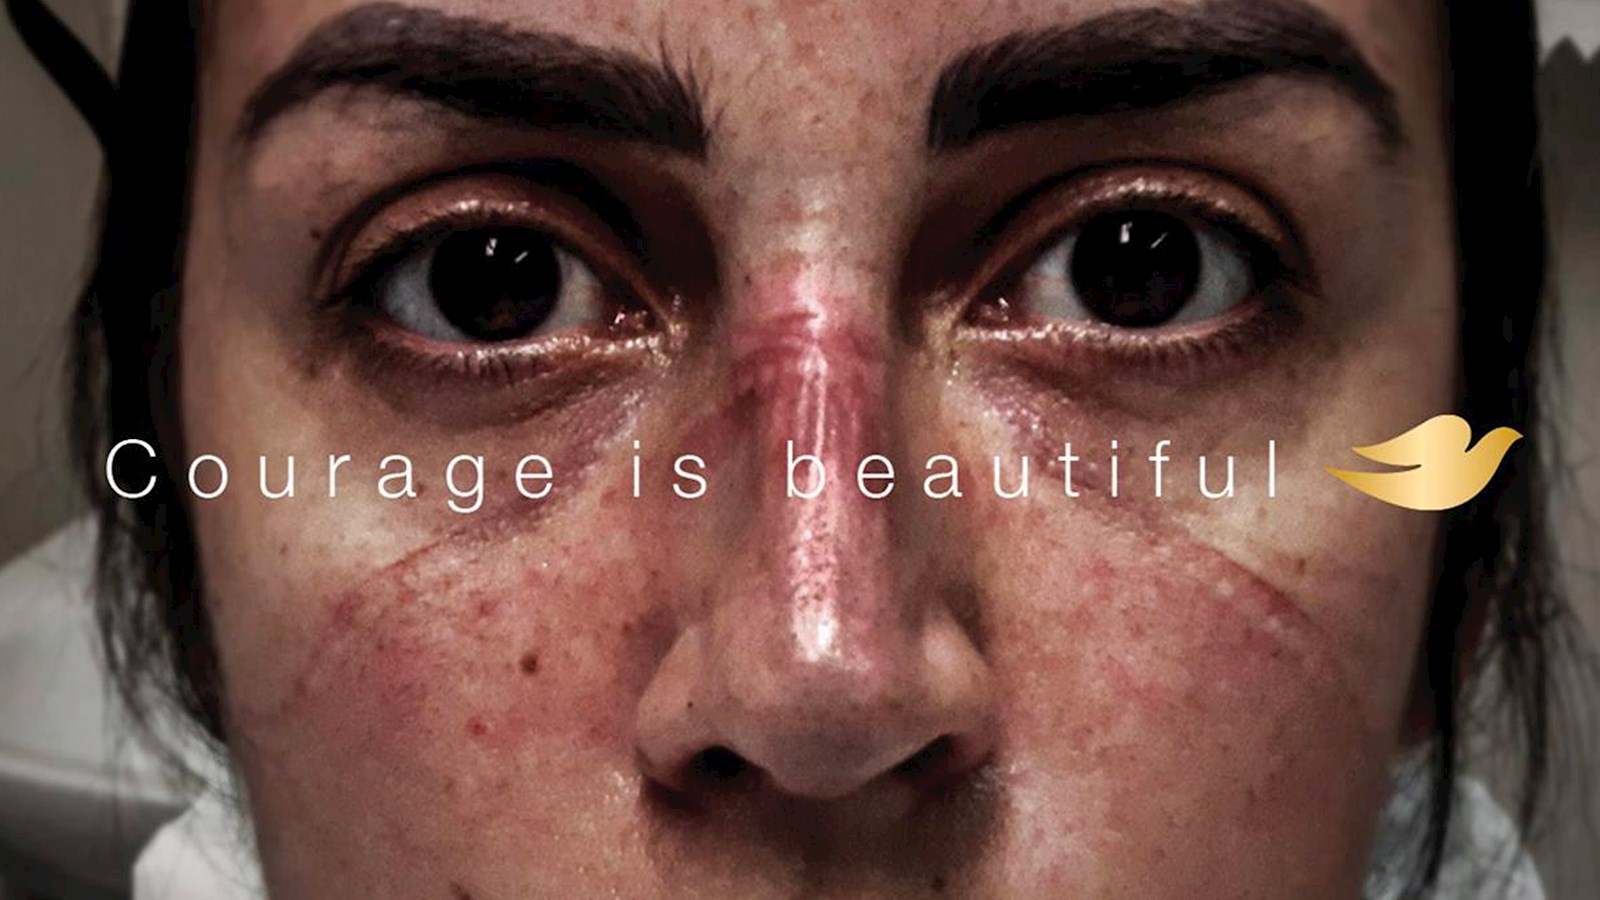 Close up of a health worker's face with "Courage is Beautiful" overlaid with the Dove logo